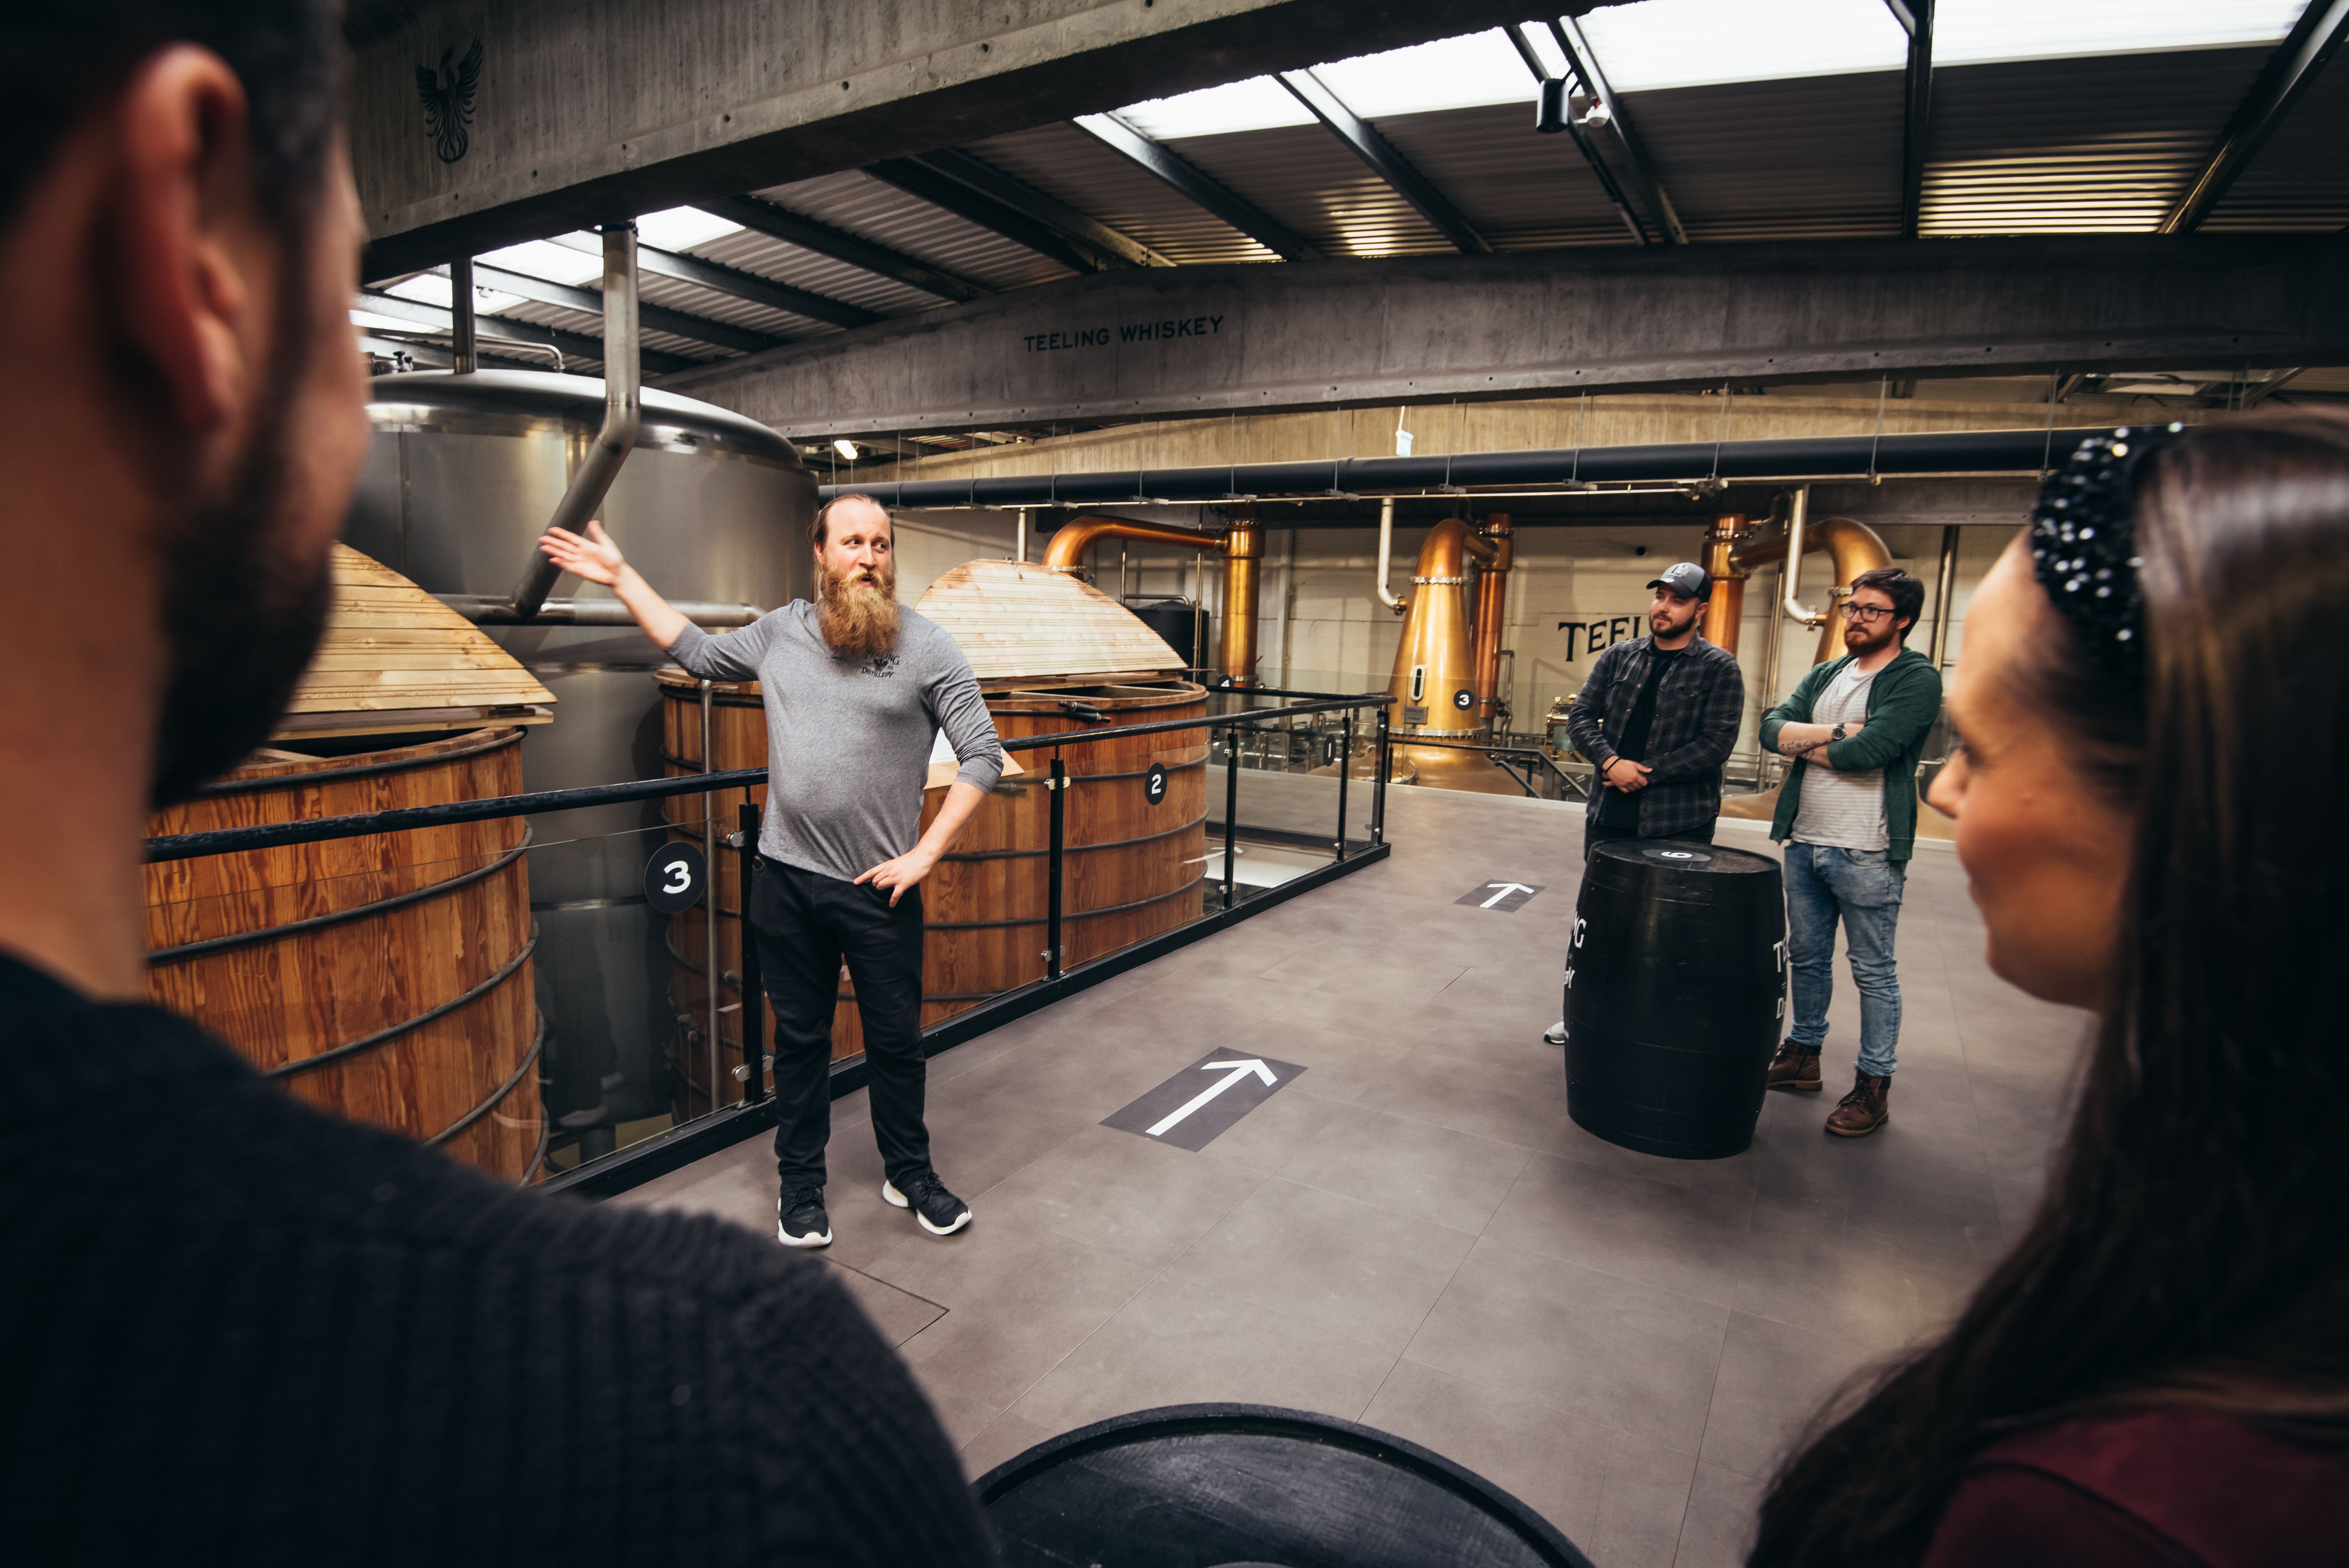 A guide giving a tour at Teeling Whiskey Distillery standing at one of the vats